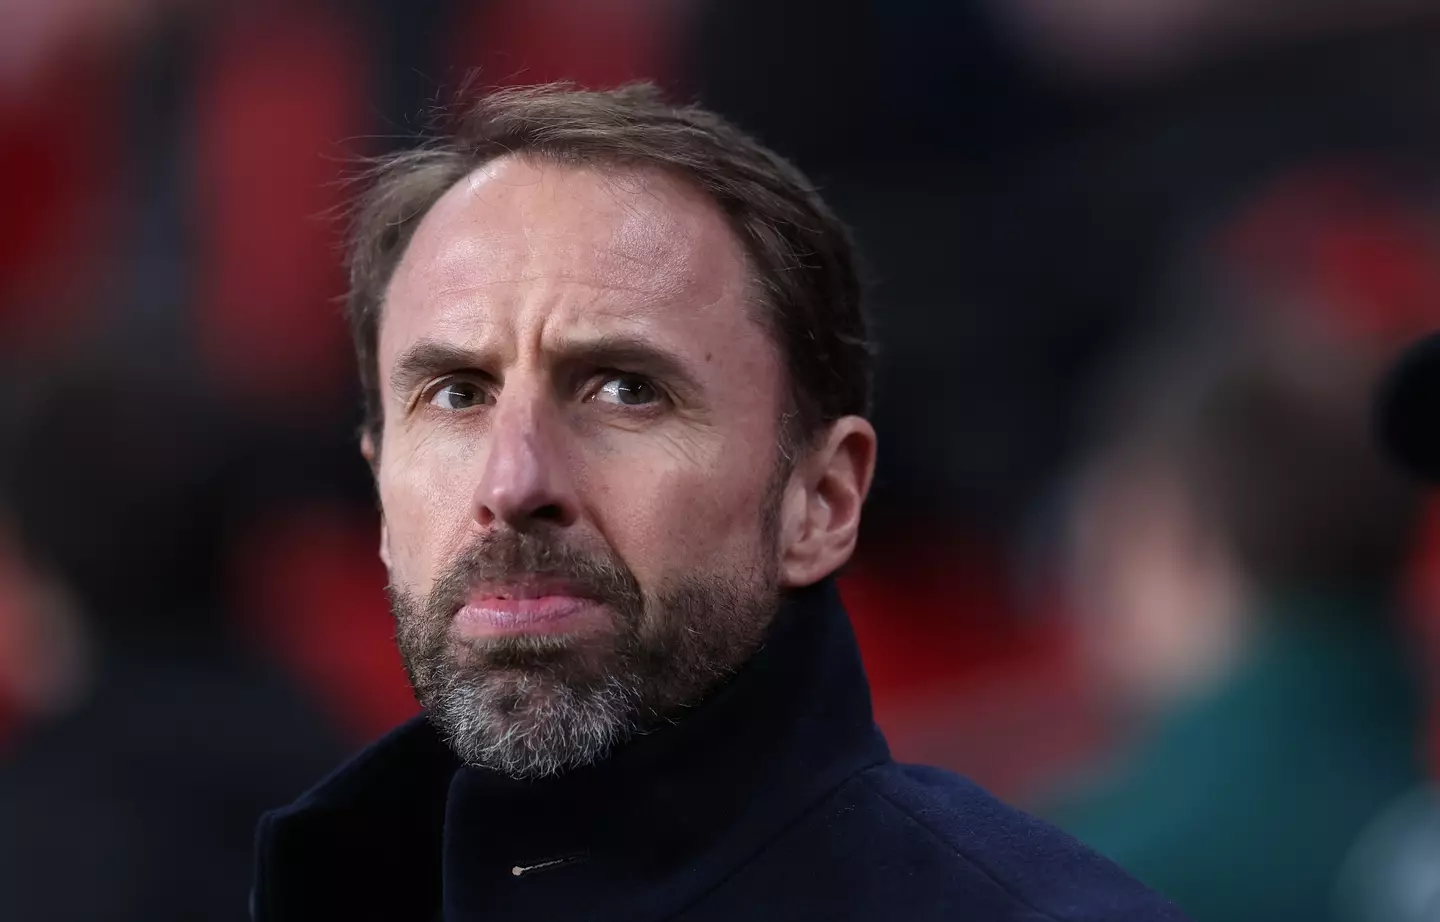 Southgate is said to be uncertain by the prospect of taking the Man Utd job (Getty)